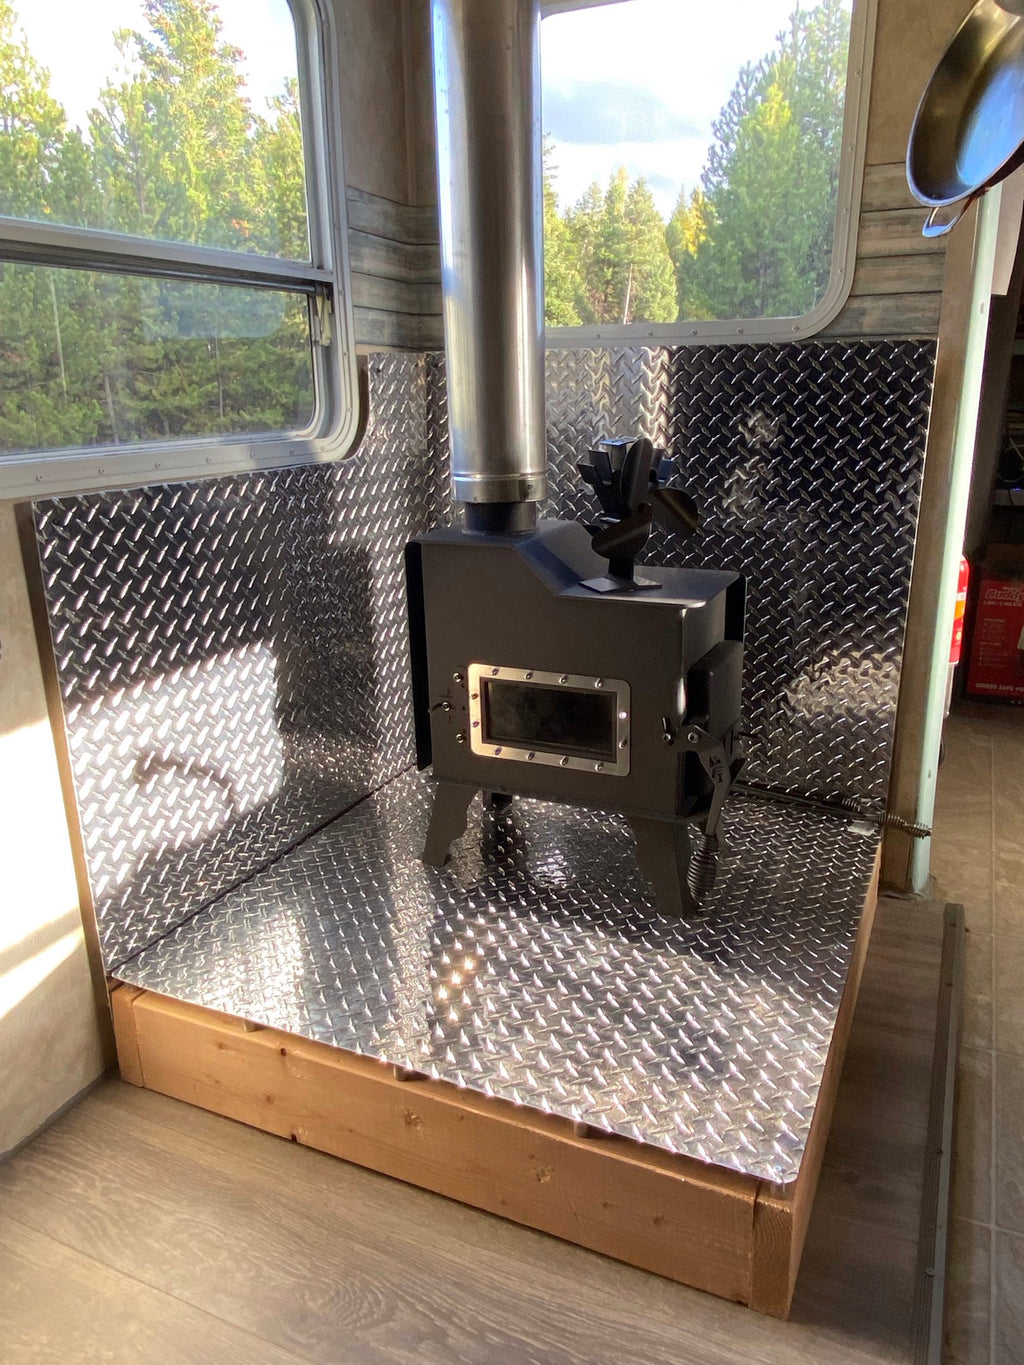 The Caboose Tiny Wood Stove